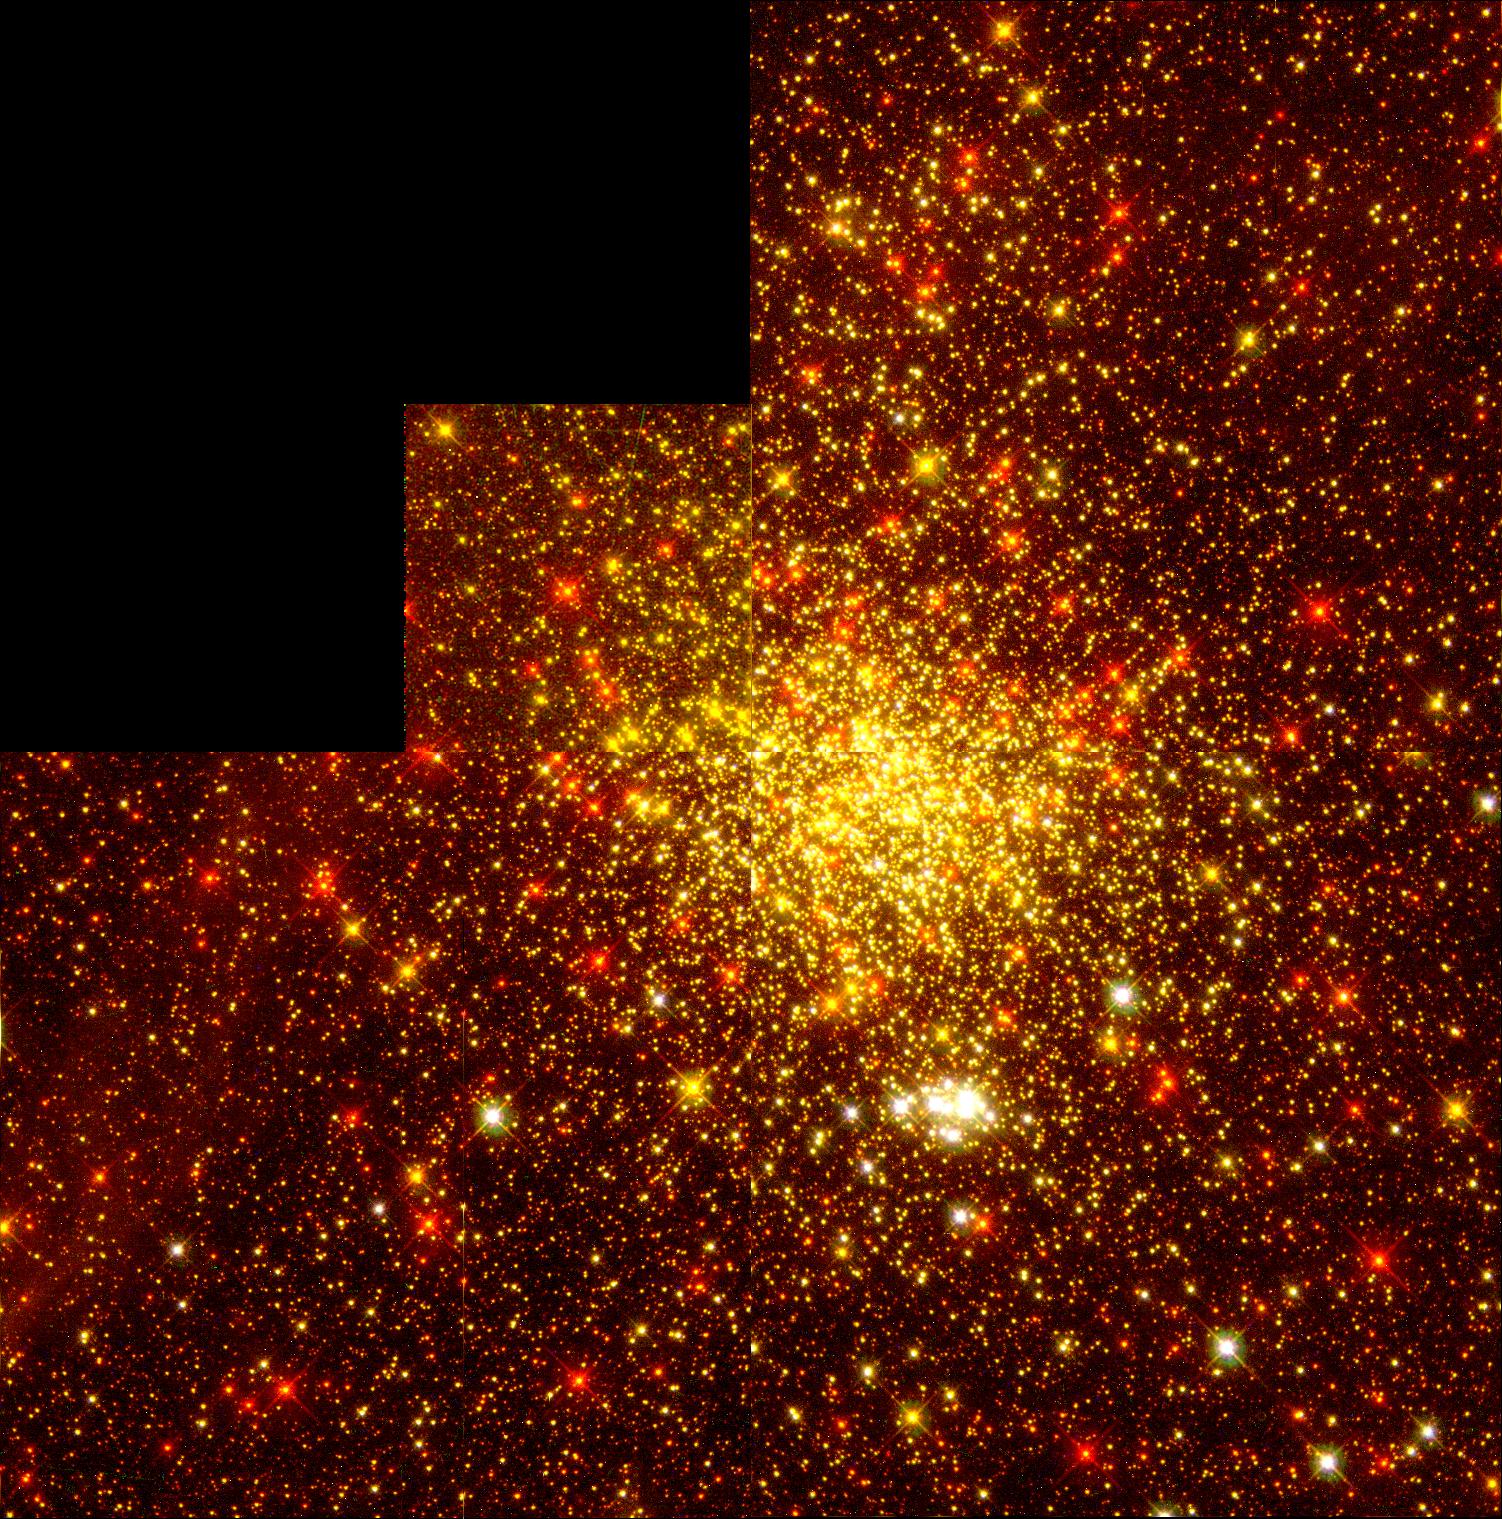 Large cluster of stars globbing together. The image itself has an orange hue to the point that every star is either orange, white orange, or deep red. Brighter in the center of the image.